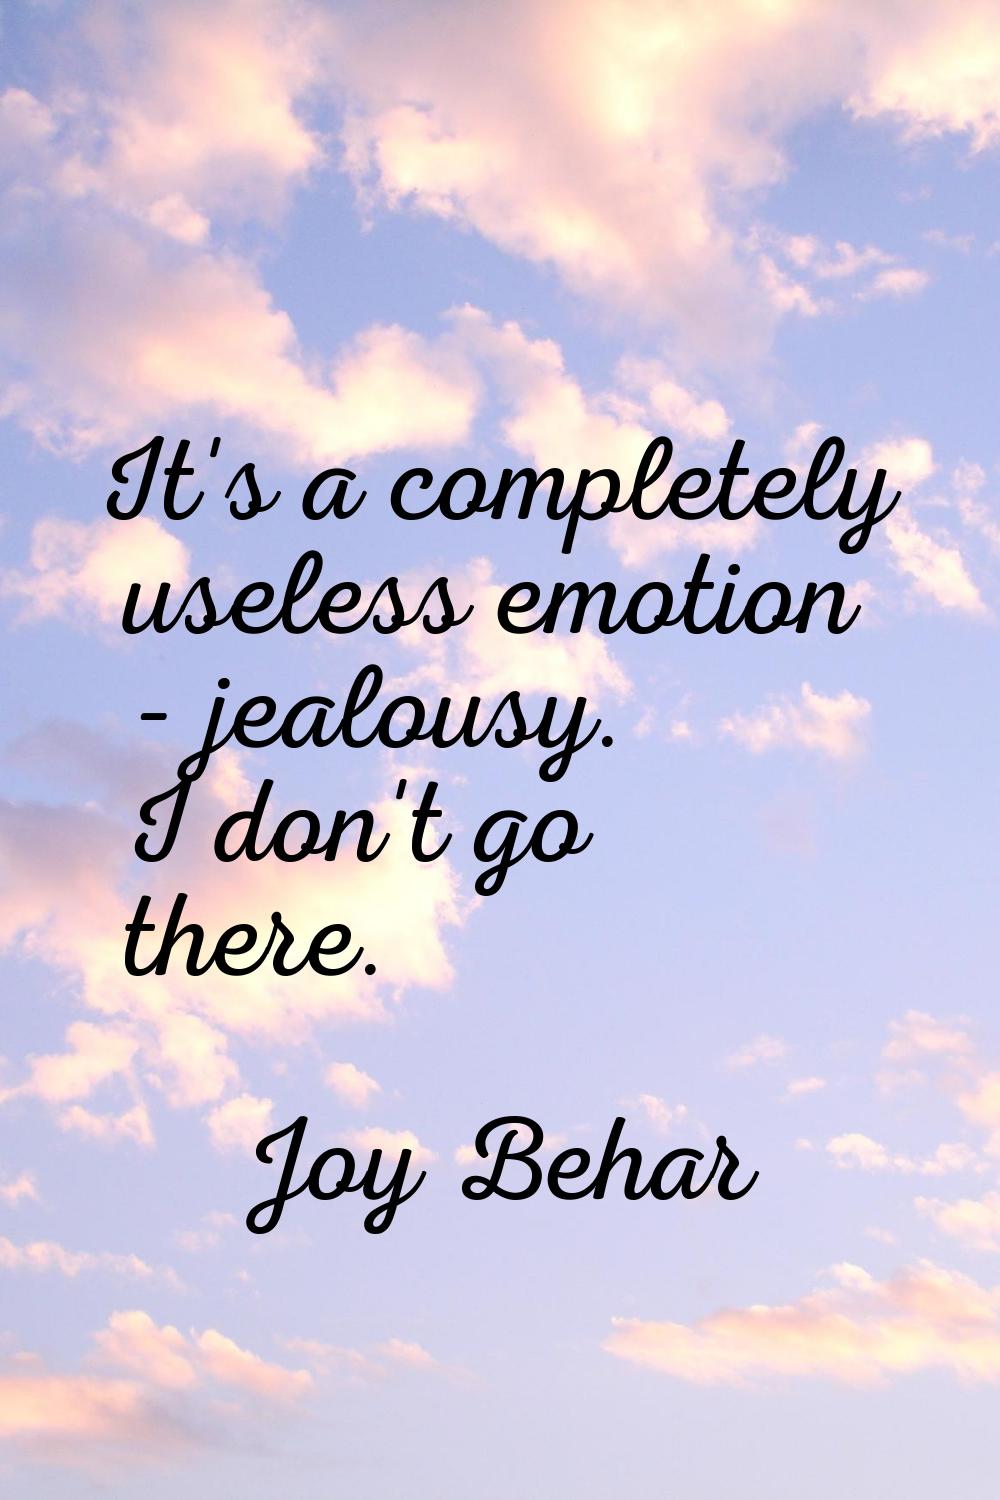 It's a completely useless emotion - jealousy. I don't go there.